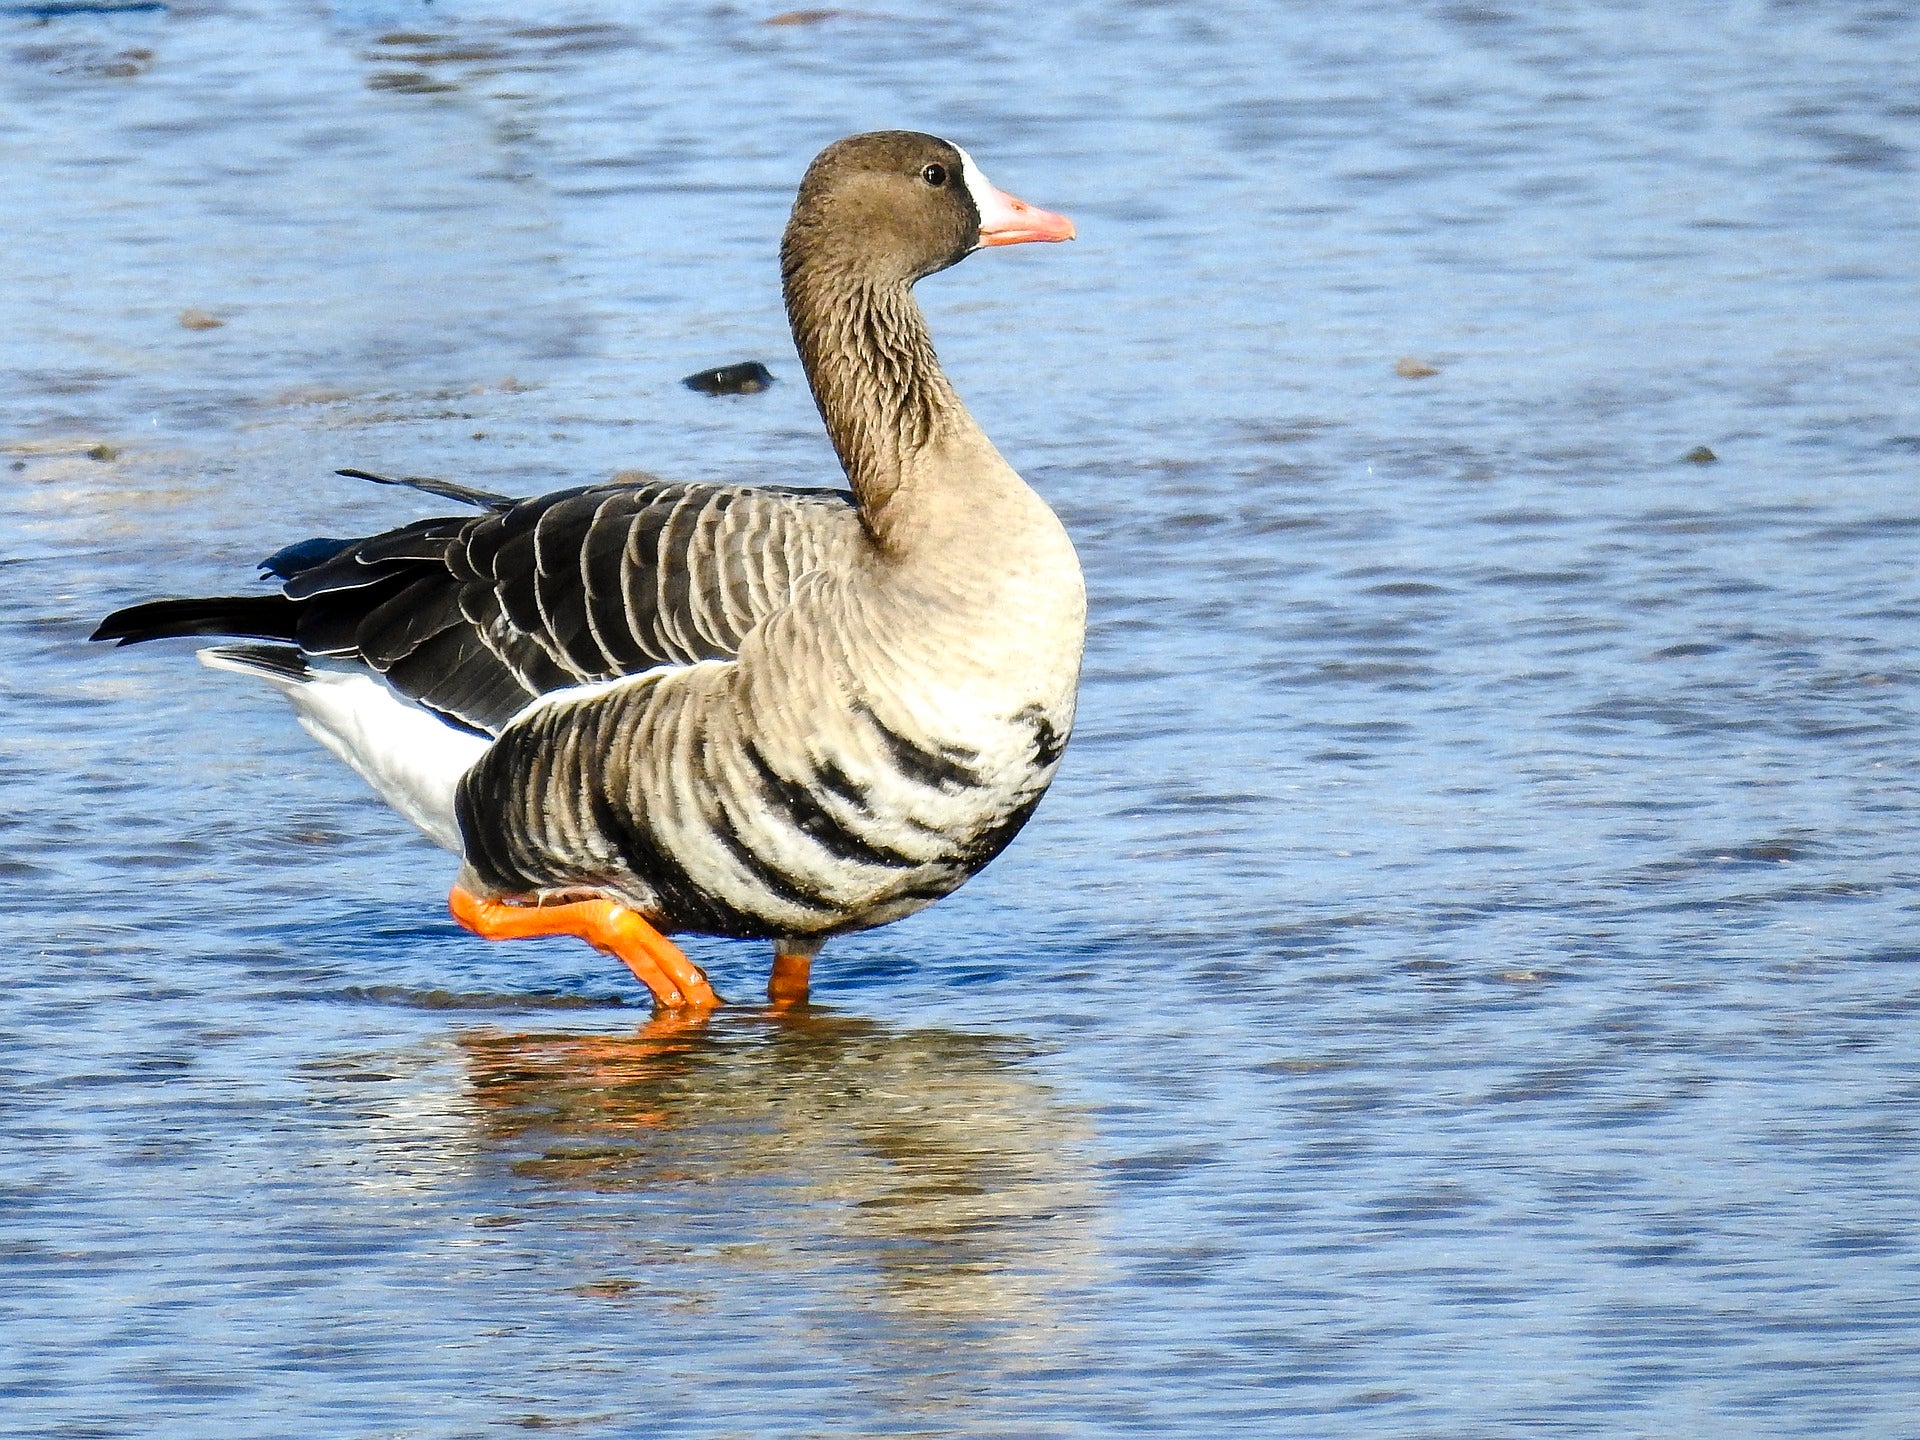 A whitefronted goose in the water.